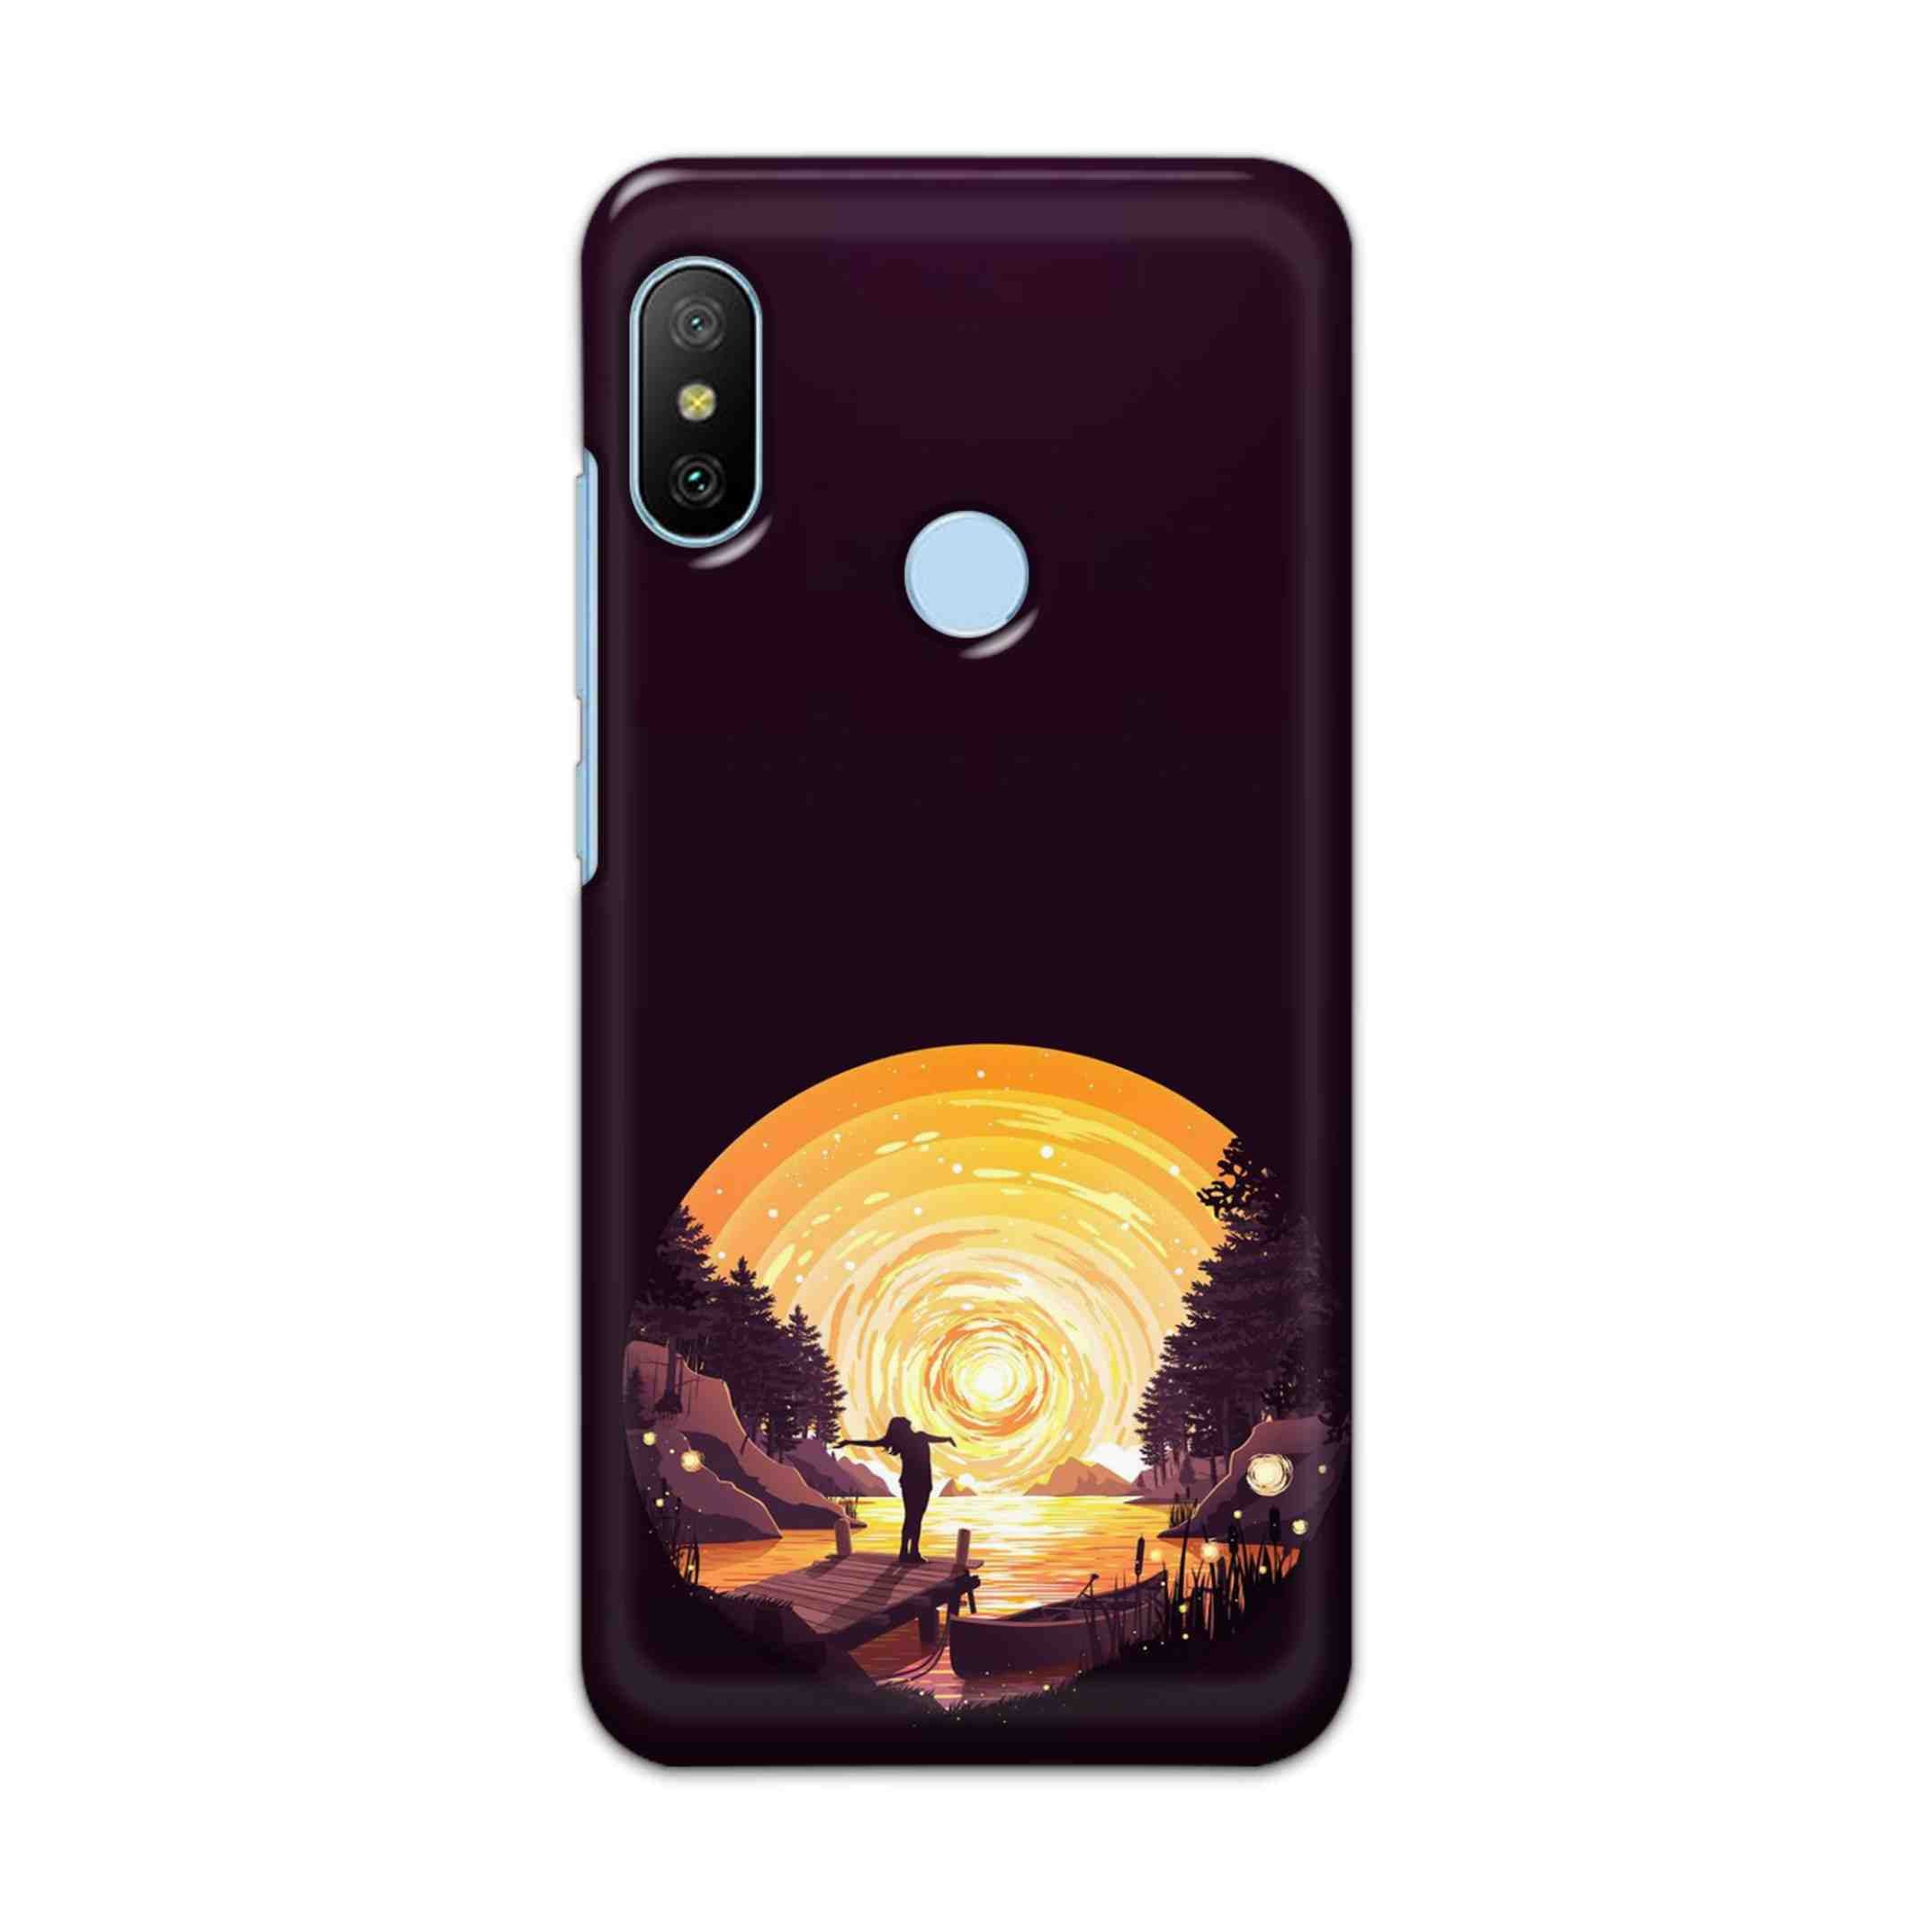 Buy Night Sunrise Hard Back Mobile Phone Case/Cover For Xiaomi A2 / 6X Online